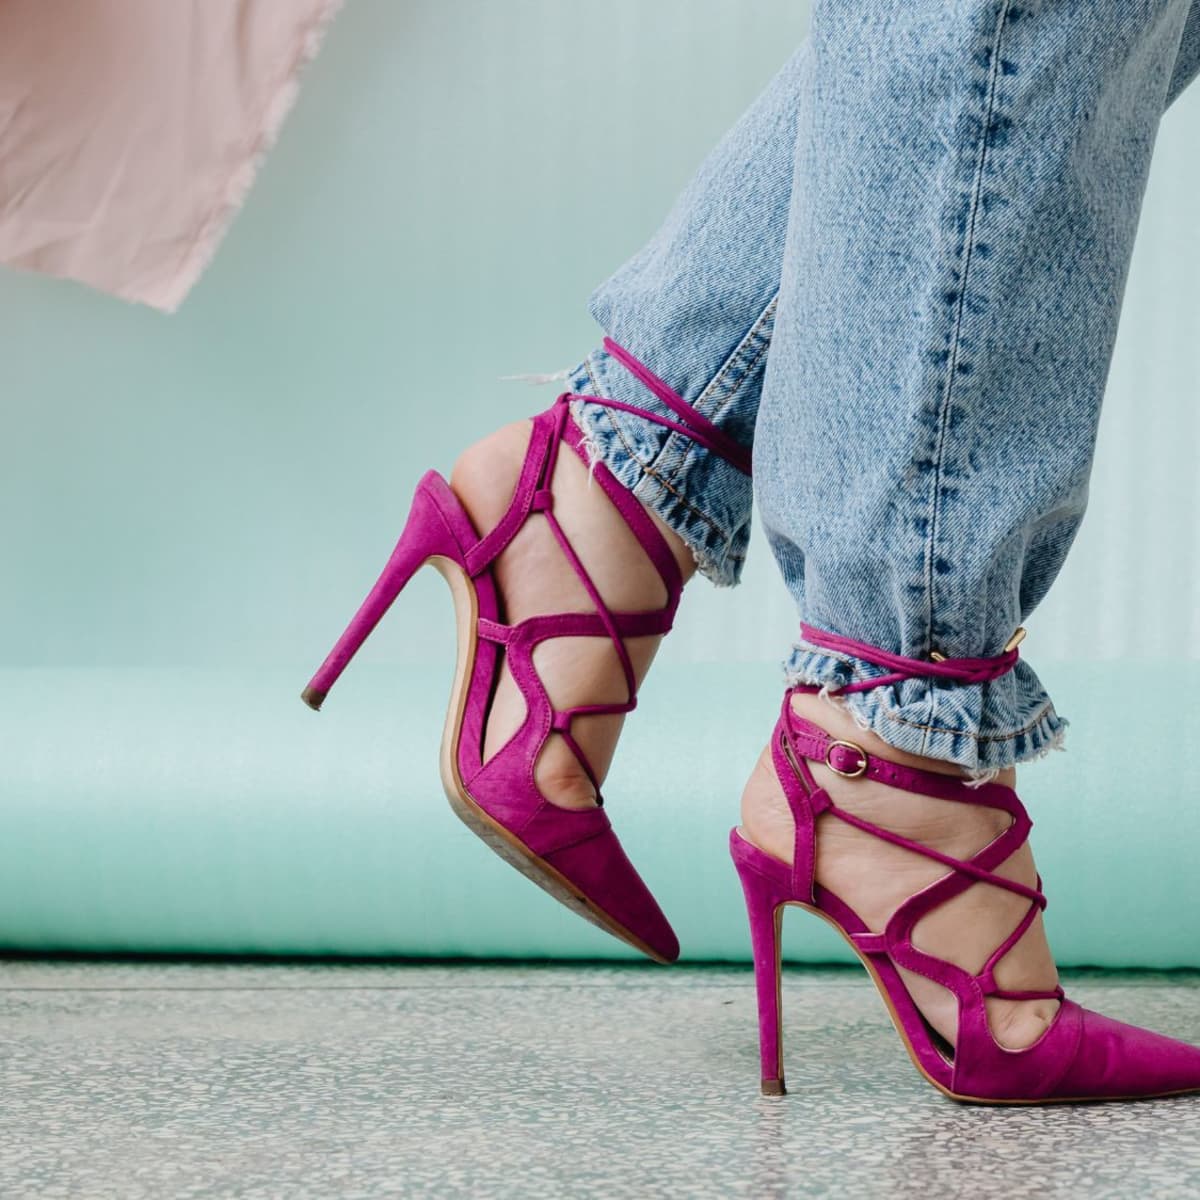 Lace-up Strappy Stiletto Heeled Sandals For Women's New Fashion | SHEIN USA